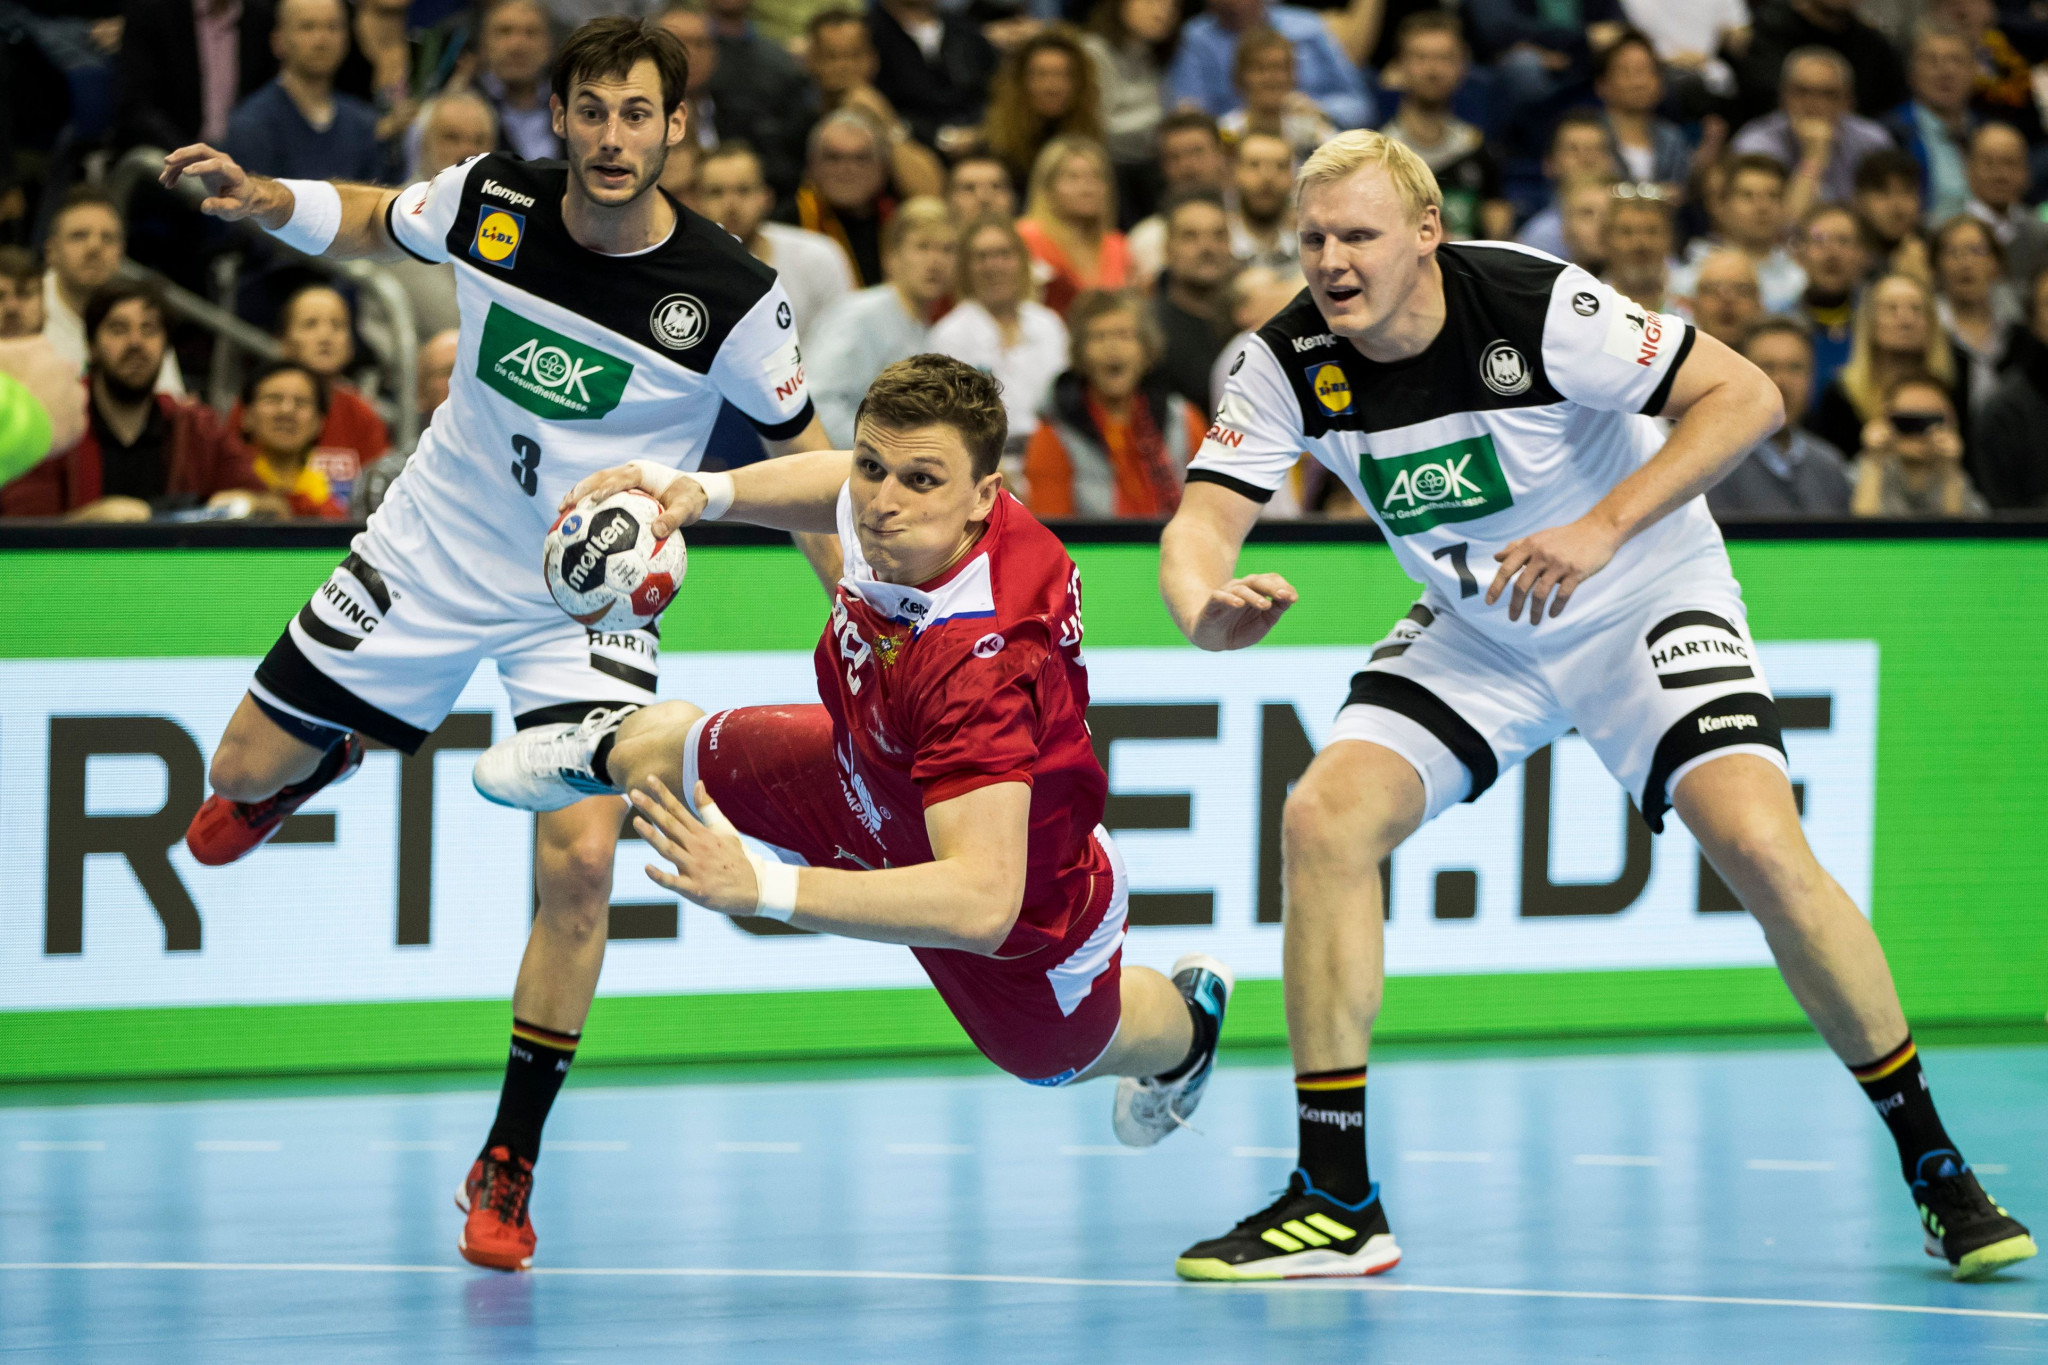 Co-hosts Germany denied third straight win at IHF Men's Handball World Championship as Russia snatch late draw